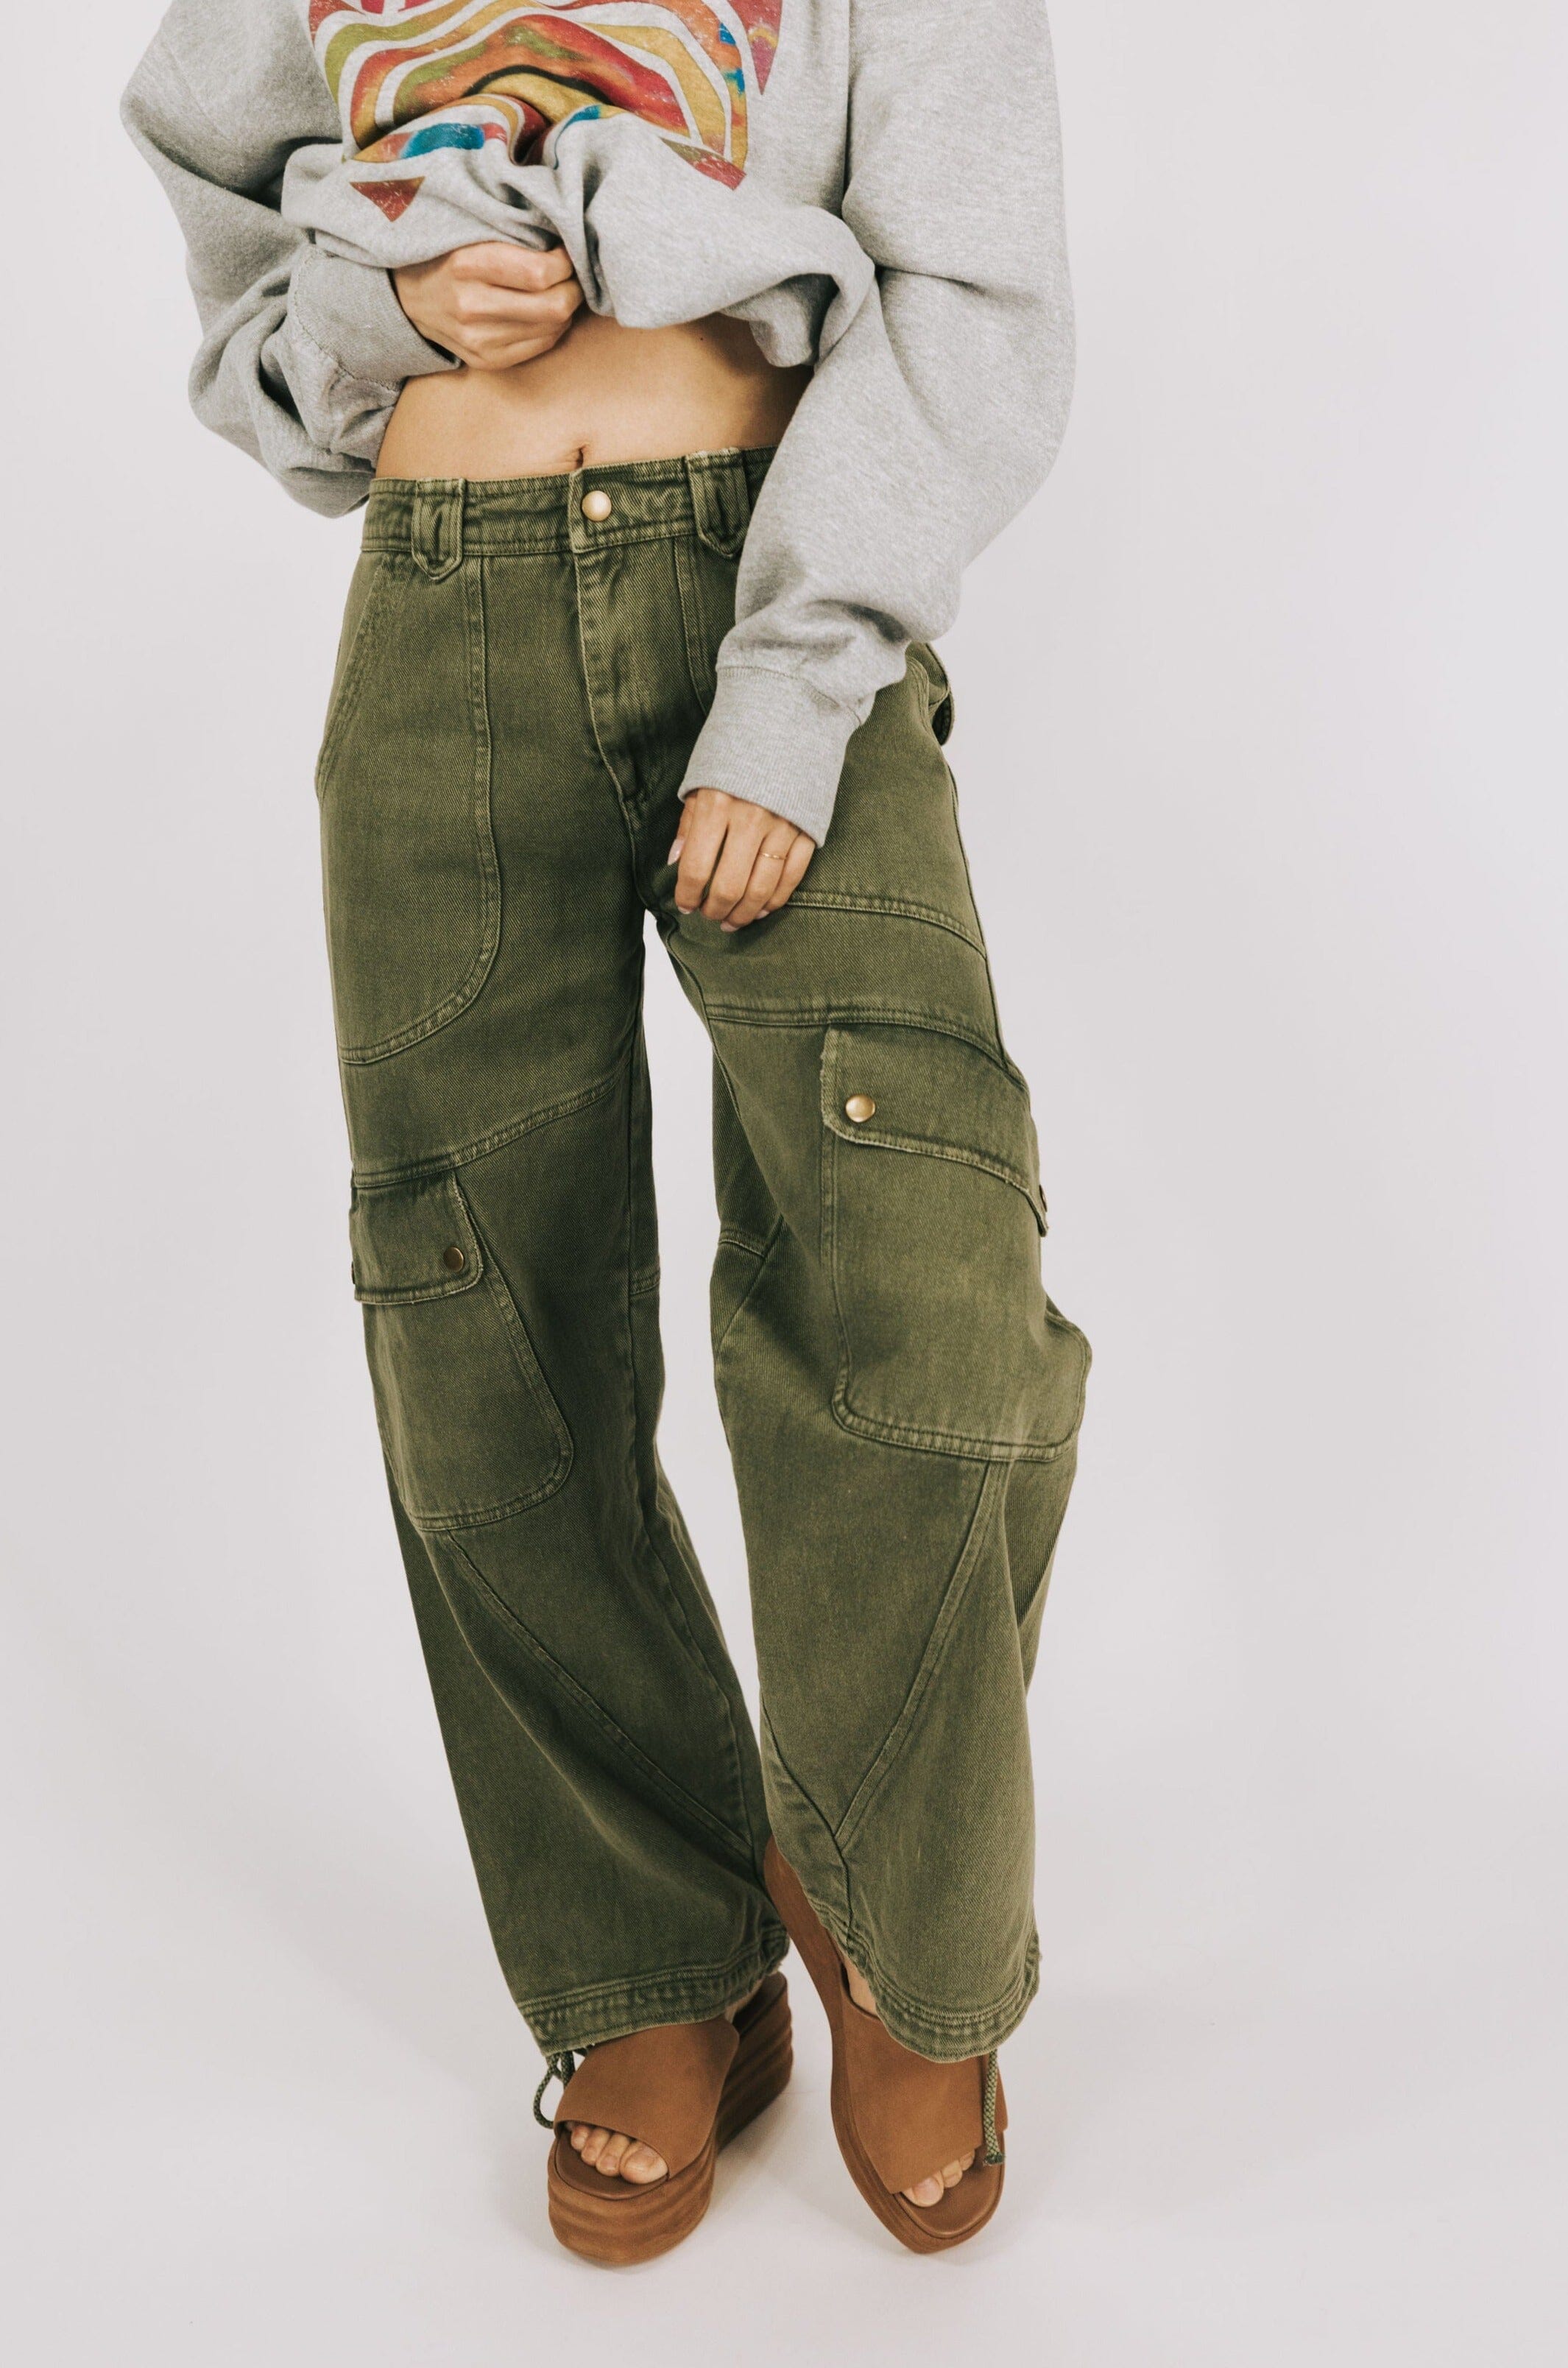 FREE PEOPLE - Come And Get It Utility Pants